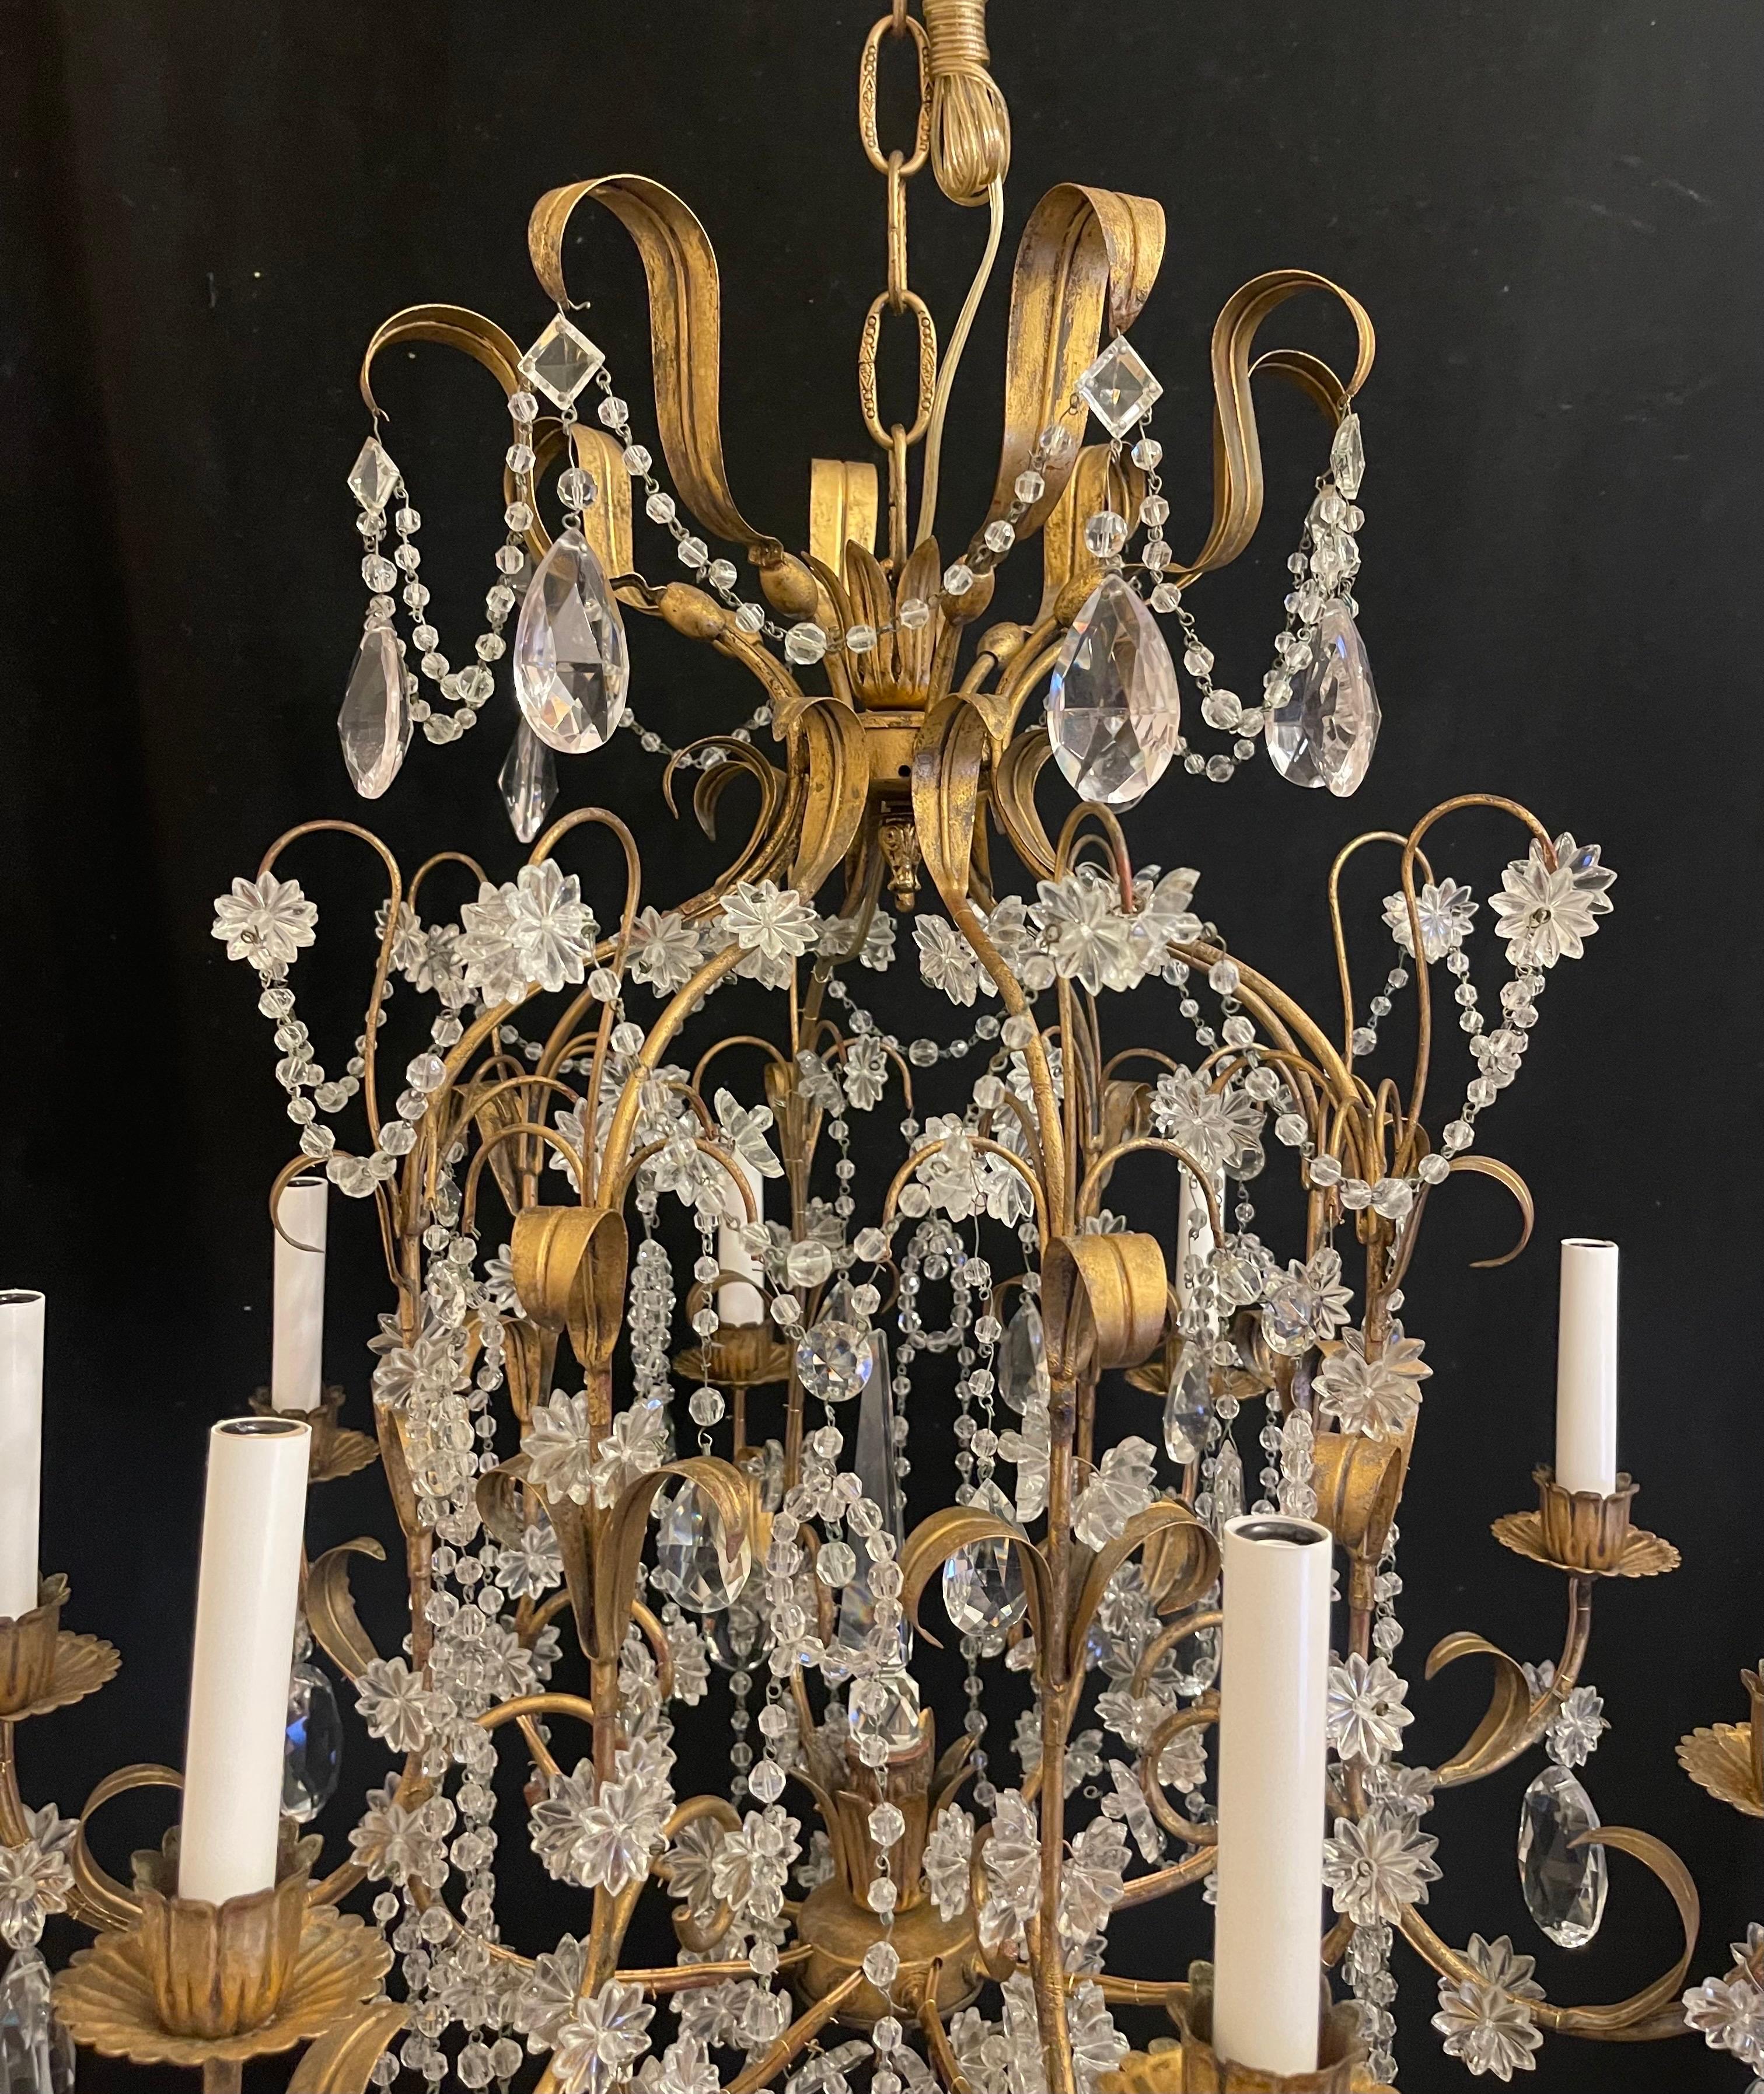 A Wonderful Whimsical Mid-Century Maison Baguès Style, Gold Gilt Bird Cage With Beaded Swag And Crystal Drops Adorned With Star. This Large 8 Candelabra Light Chandelier Has Been Completely Rewired And Comes With Chain Canopy And Mounting Hardware.